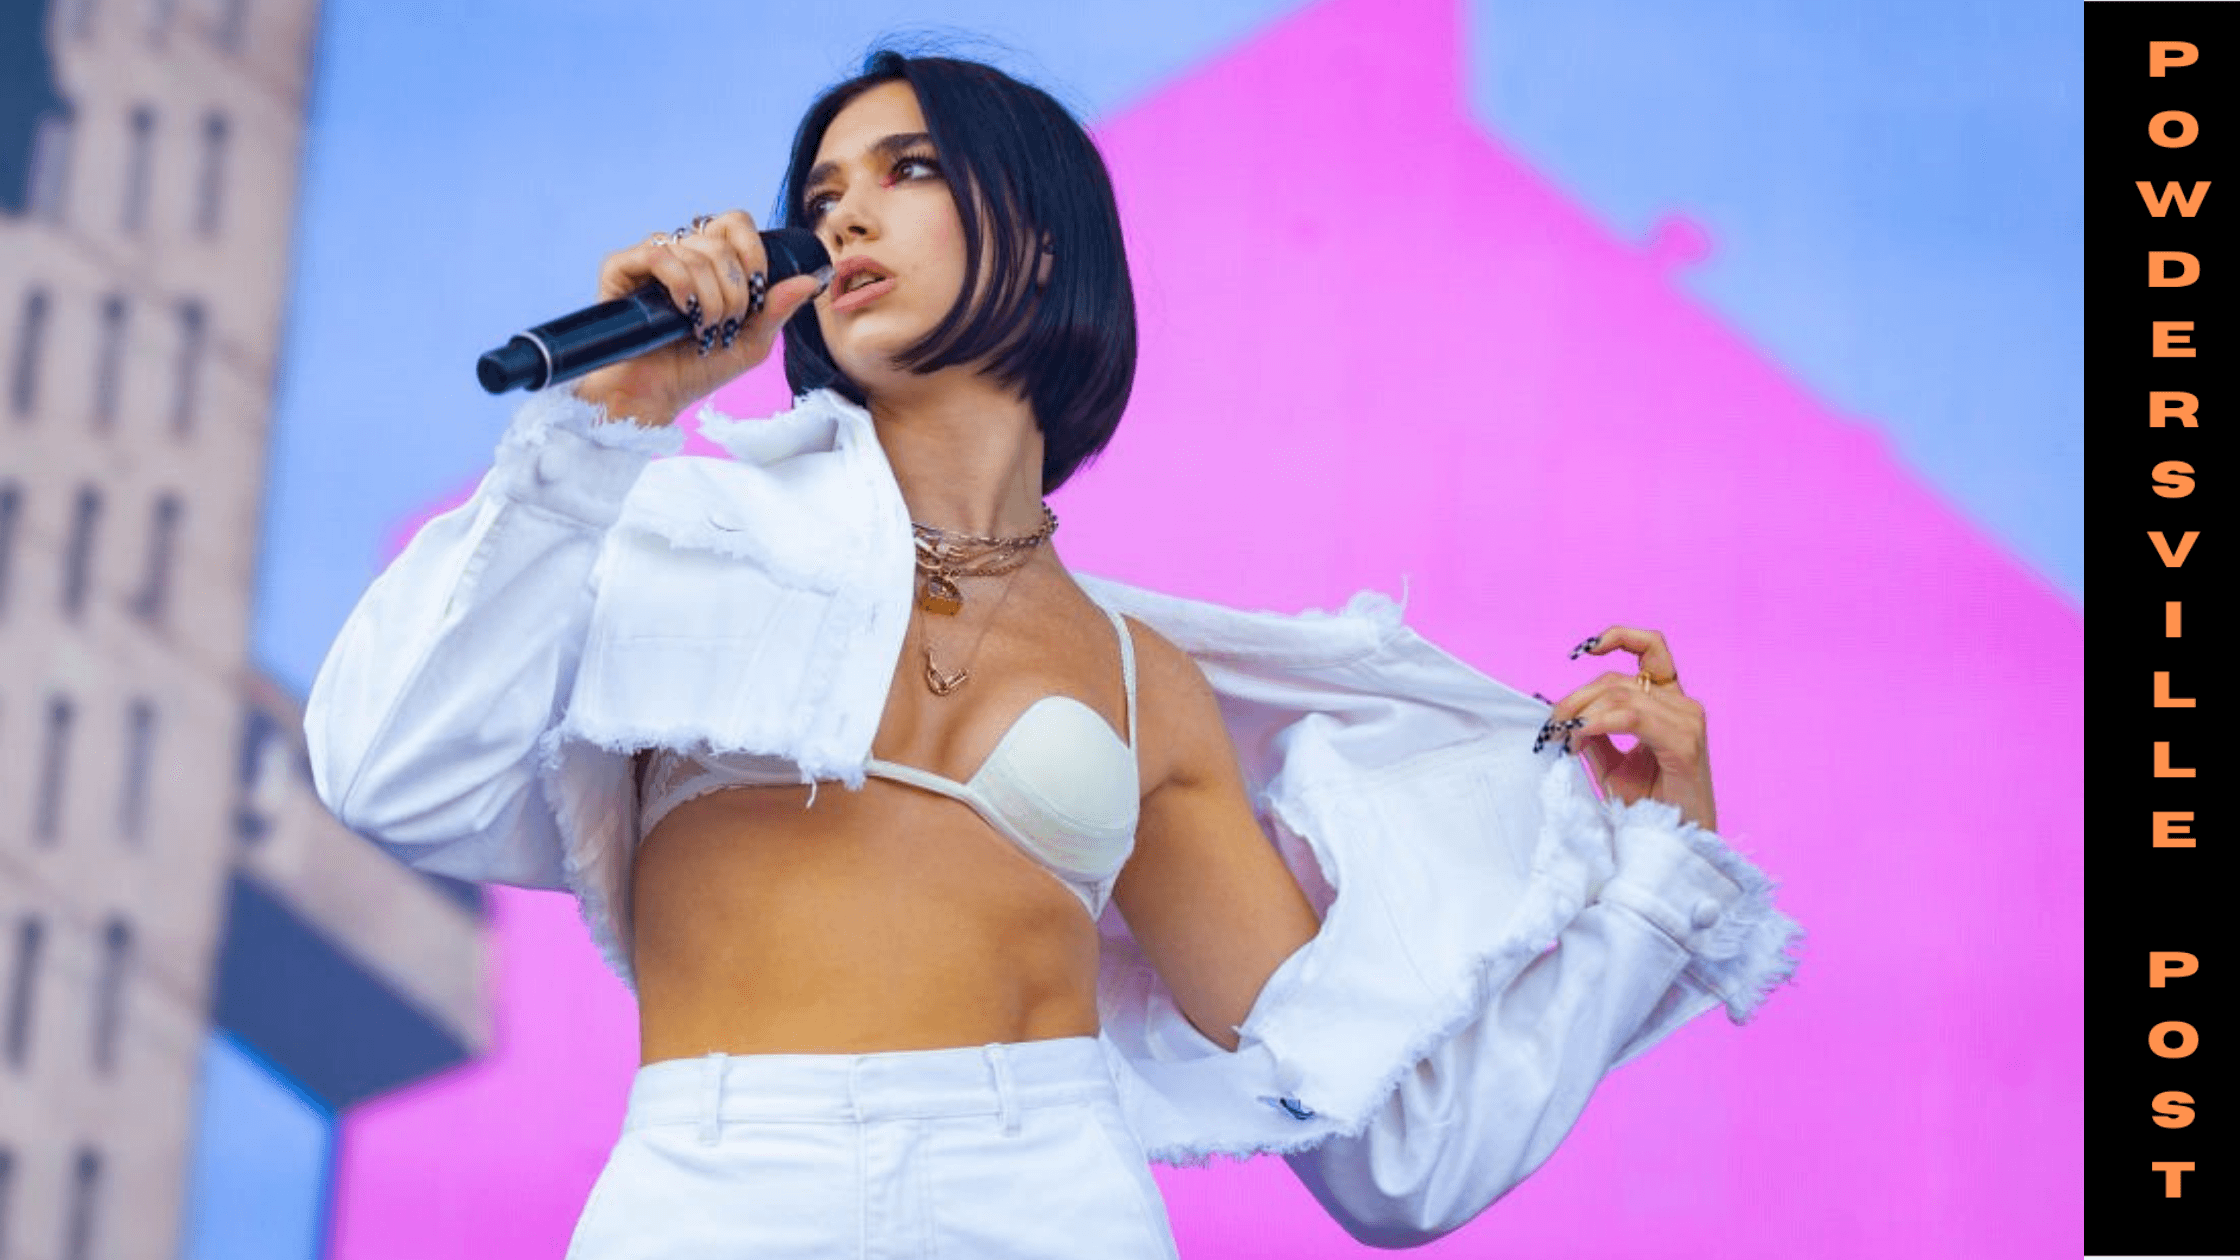 Dua Lipa Sued For Alleged Plagiarism On 'Levitating' From 'Live Your Life' Hits Second Copyright Issue